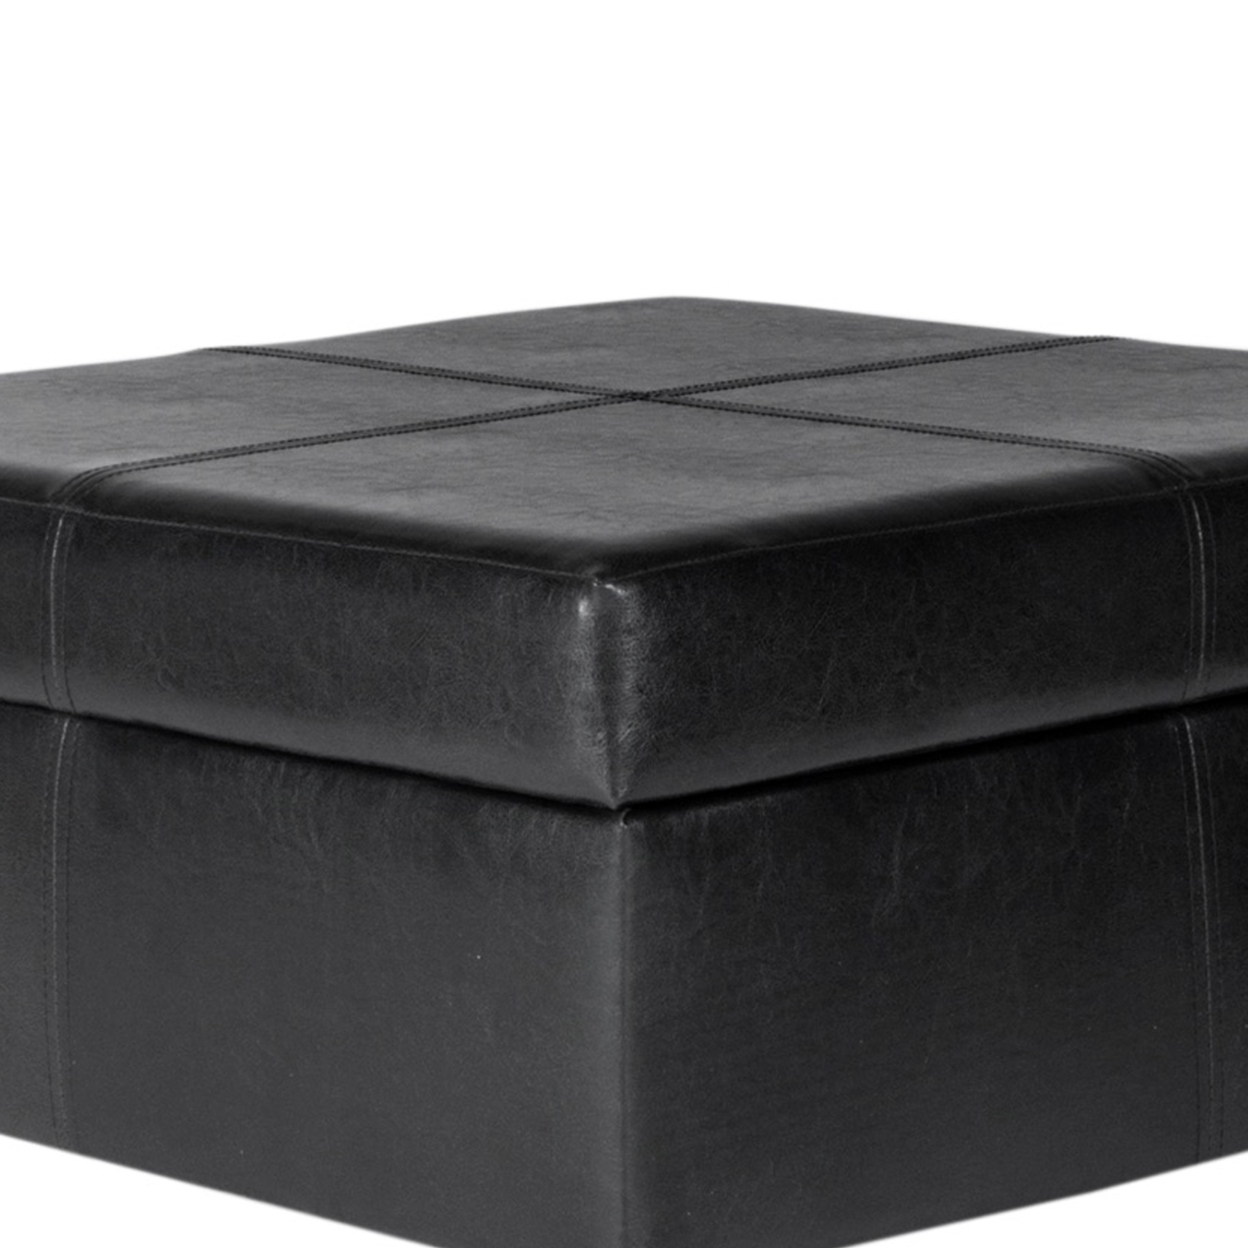 Leatherette Upholstered Wooden Ottoman With Hinged Storage, Black And Brown, Large- Saltoro Sherpi